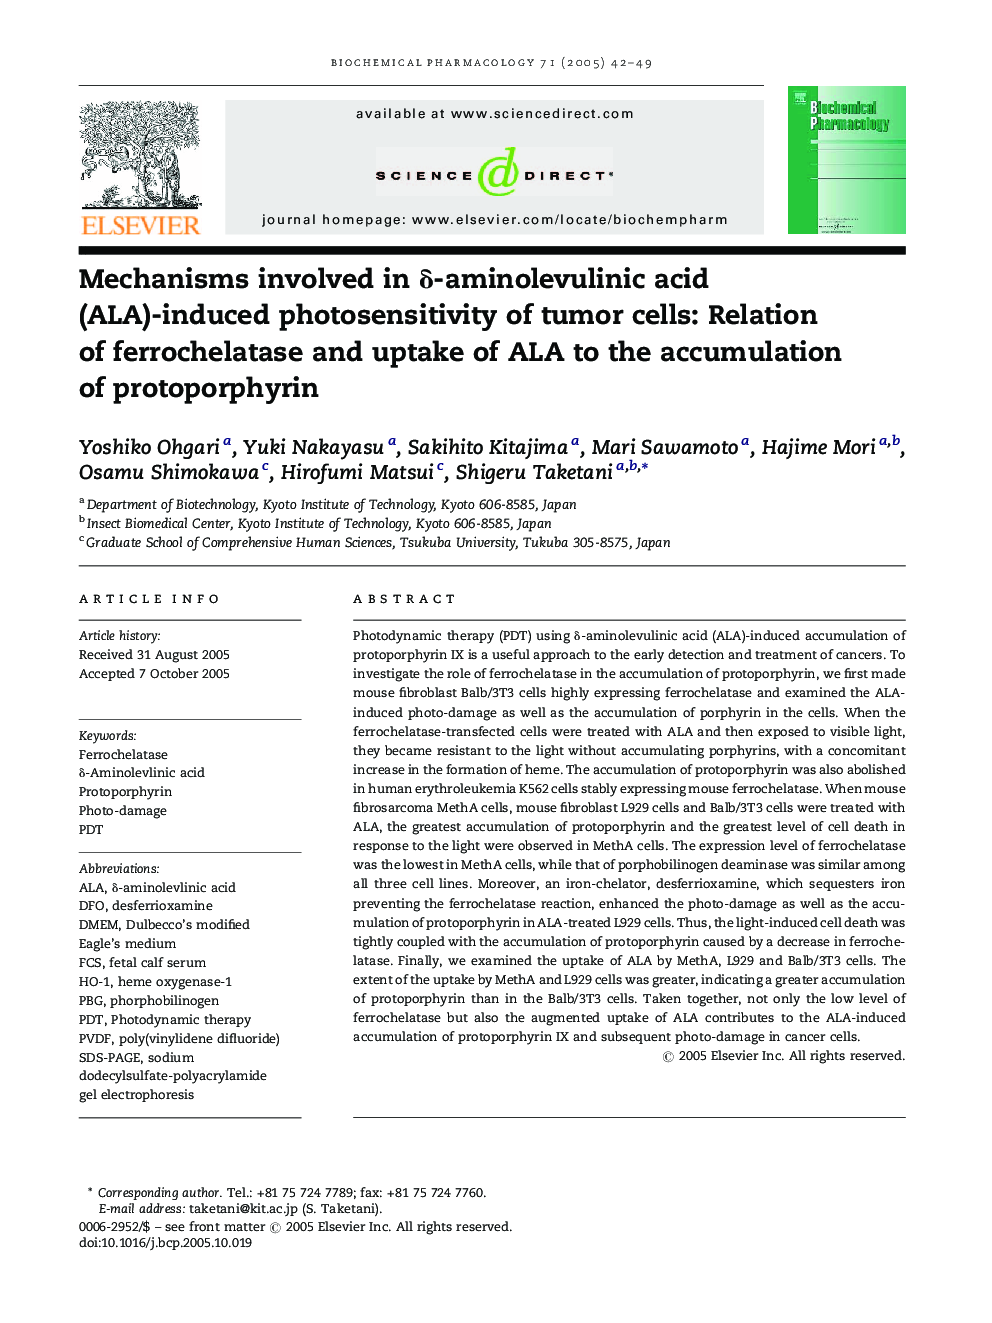 Mechanisms involved in Î´-aminolevulinic acid (ALA)-induced photosensitivity of tumor cells: Relation of ferrochelatase and uptake of ALA to the accumulation of protoporphyrin